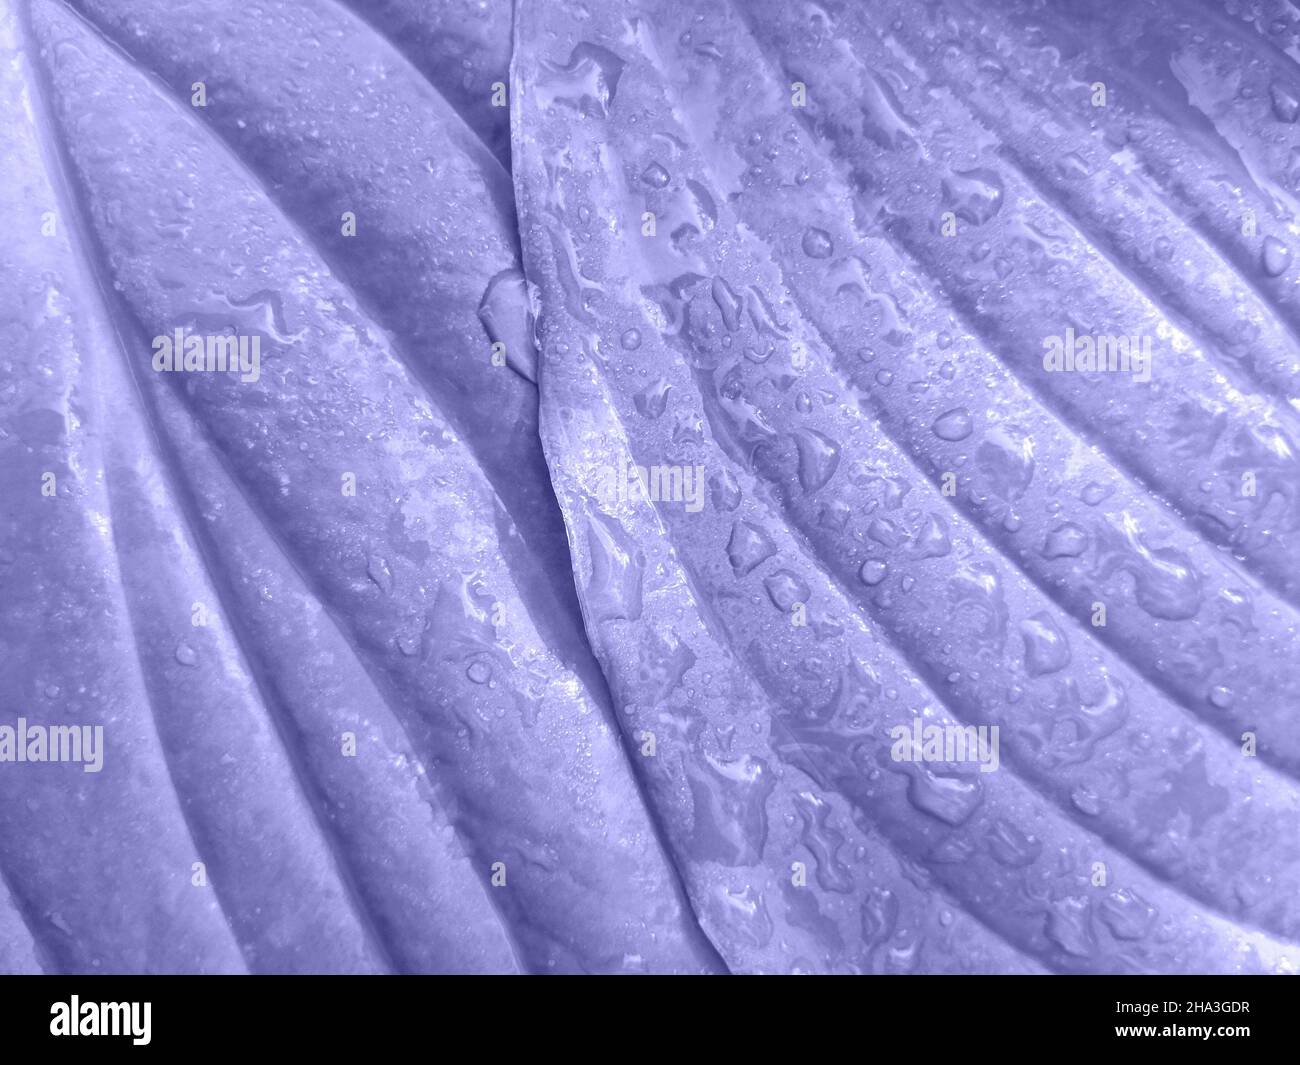 Very Peri beautiful abstract pattern of hosta leaves in color close to lavender. Elegant lines on trend colored hosta leaves after rain. Close-up. Sel Stock Photo